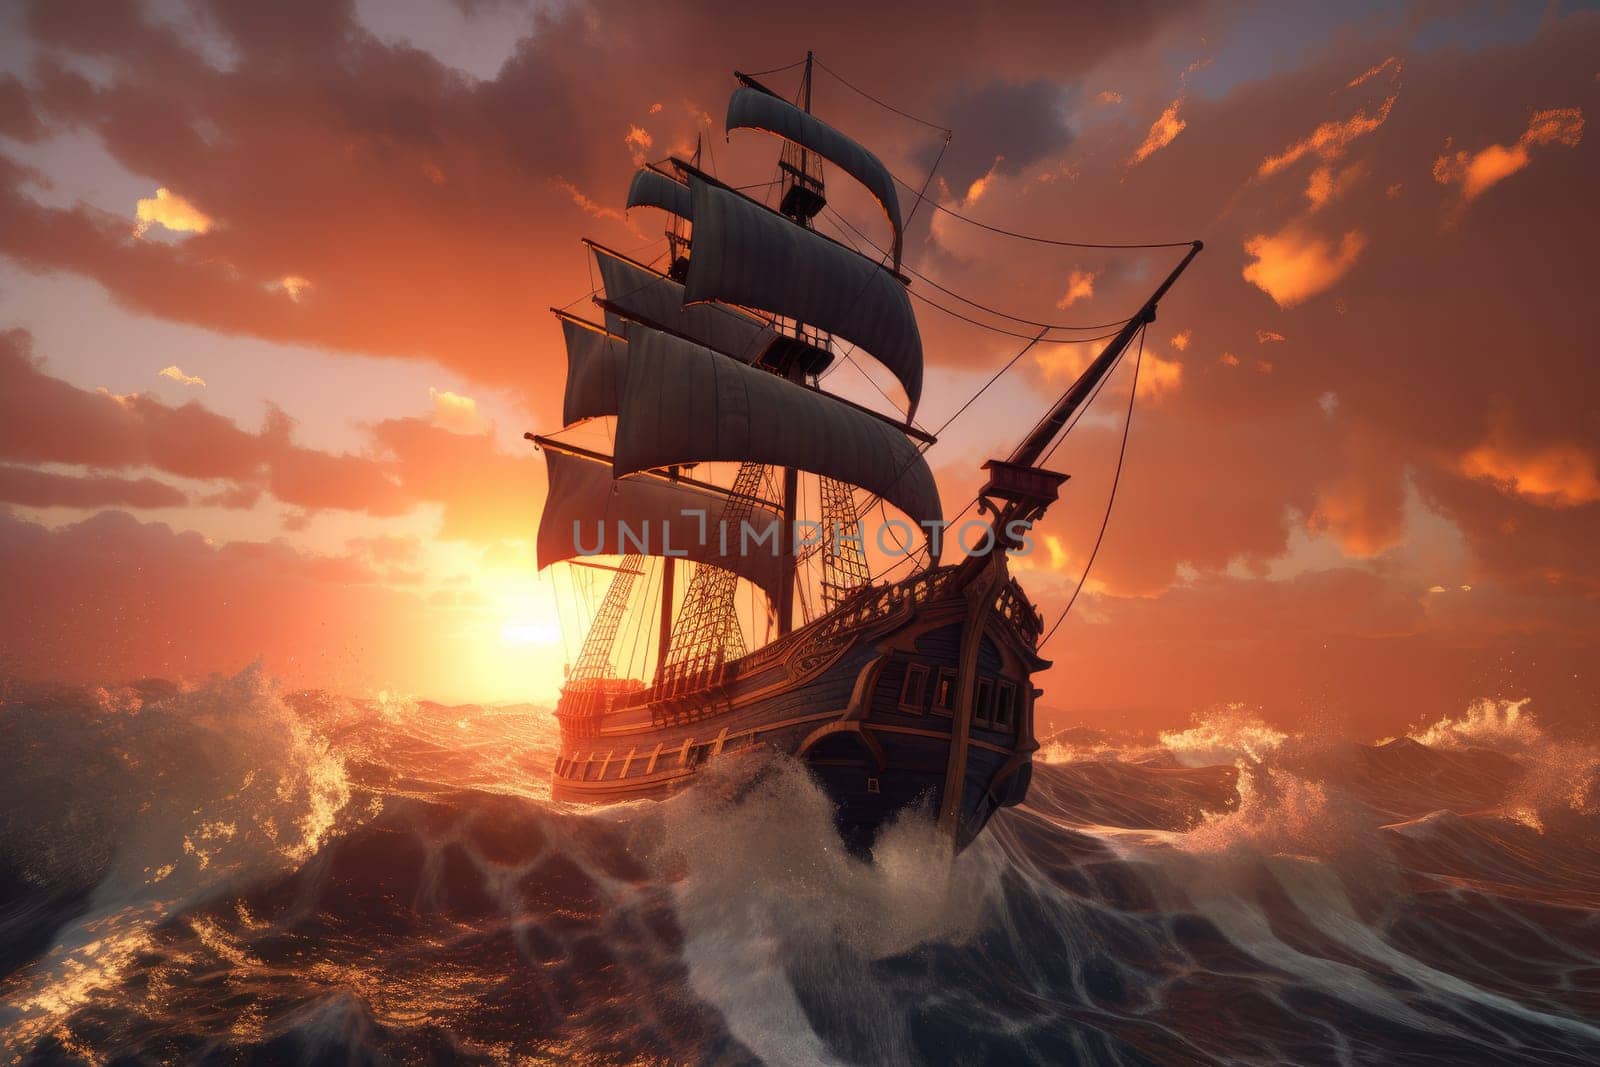 Sunset storm boat. Pirate vessel by ylivdesign